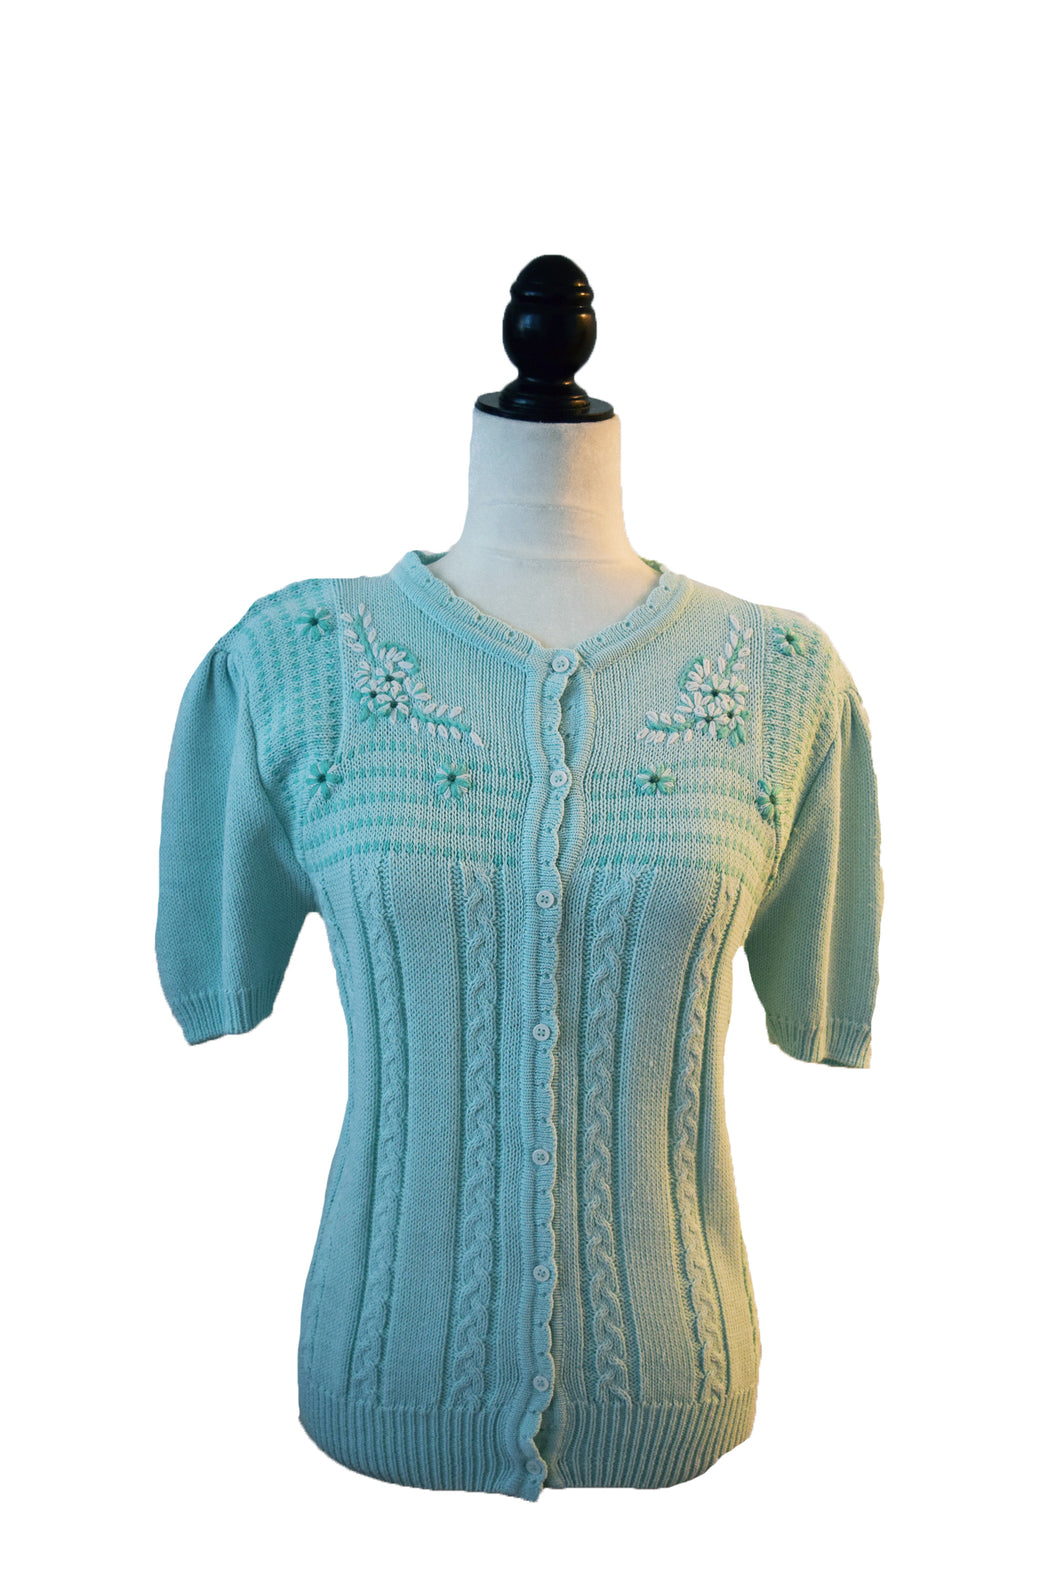 1960's Turquoise Embroidered Button Up Cardigan